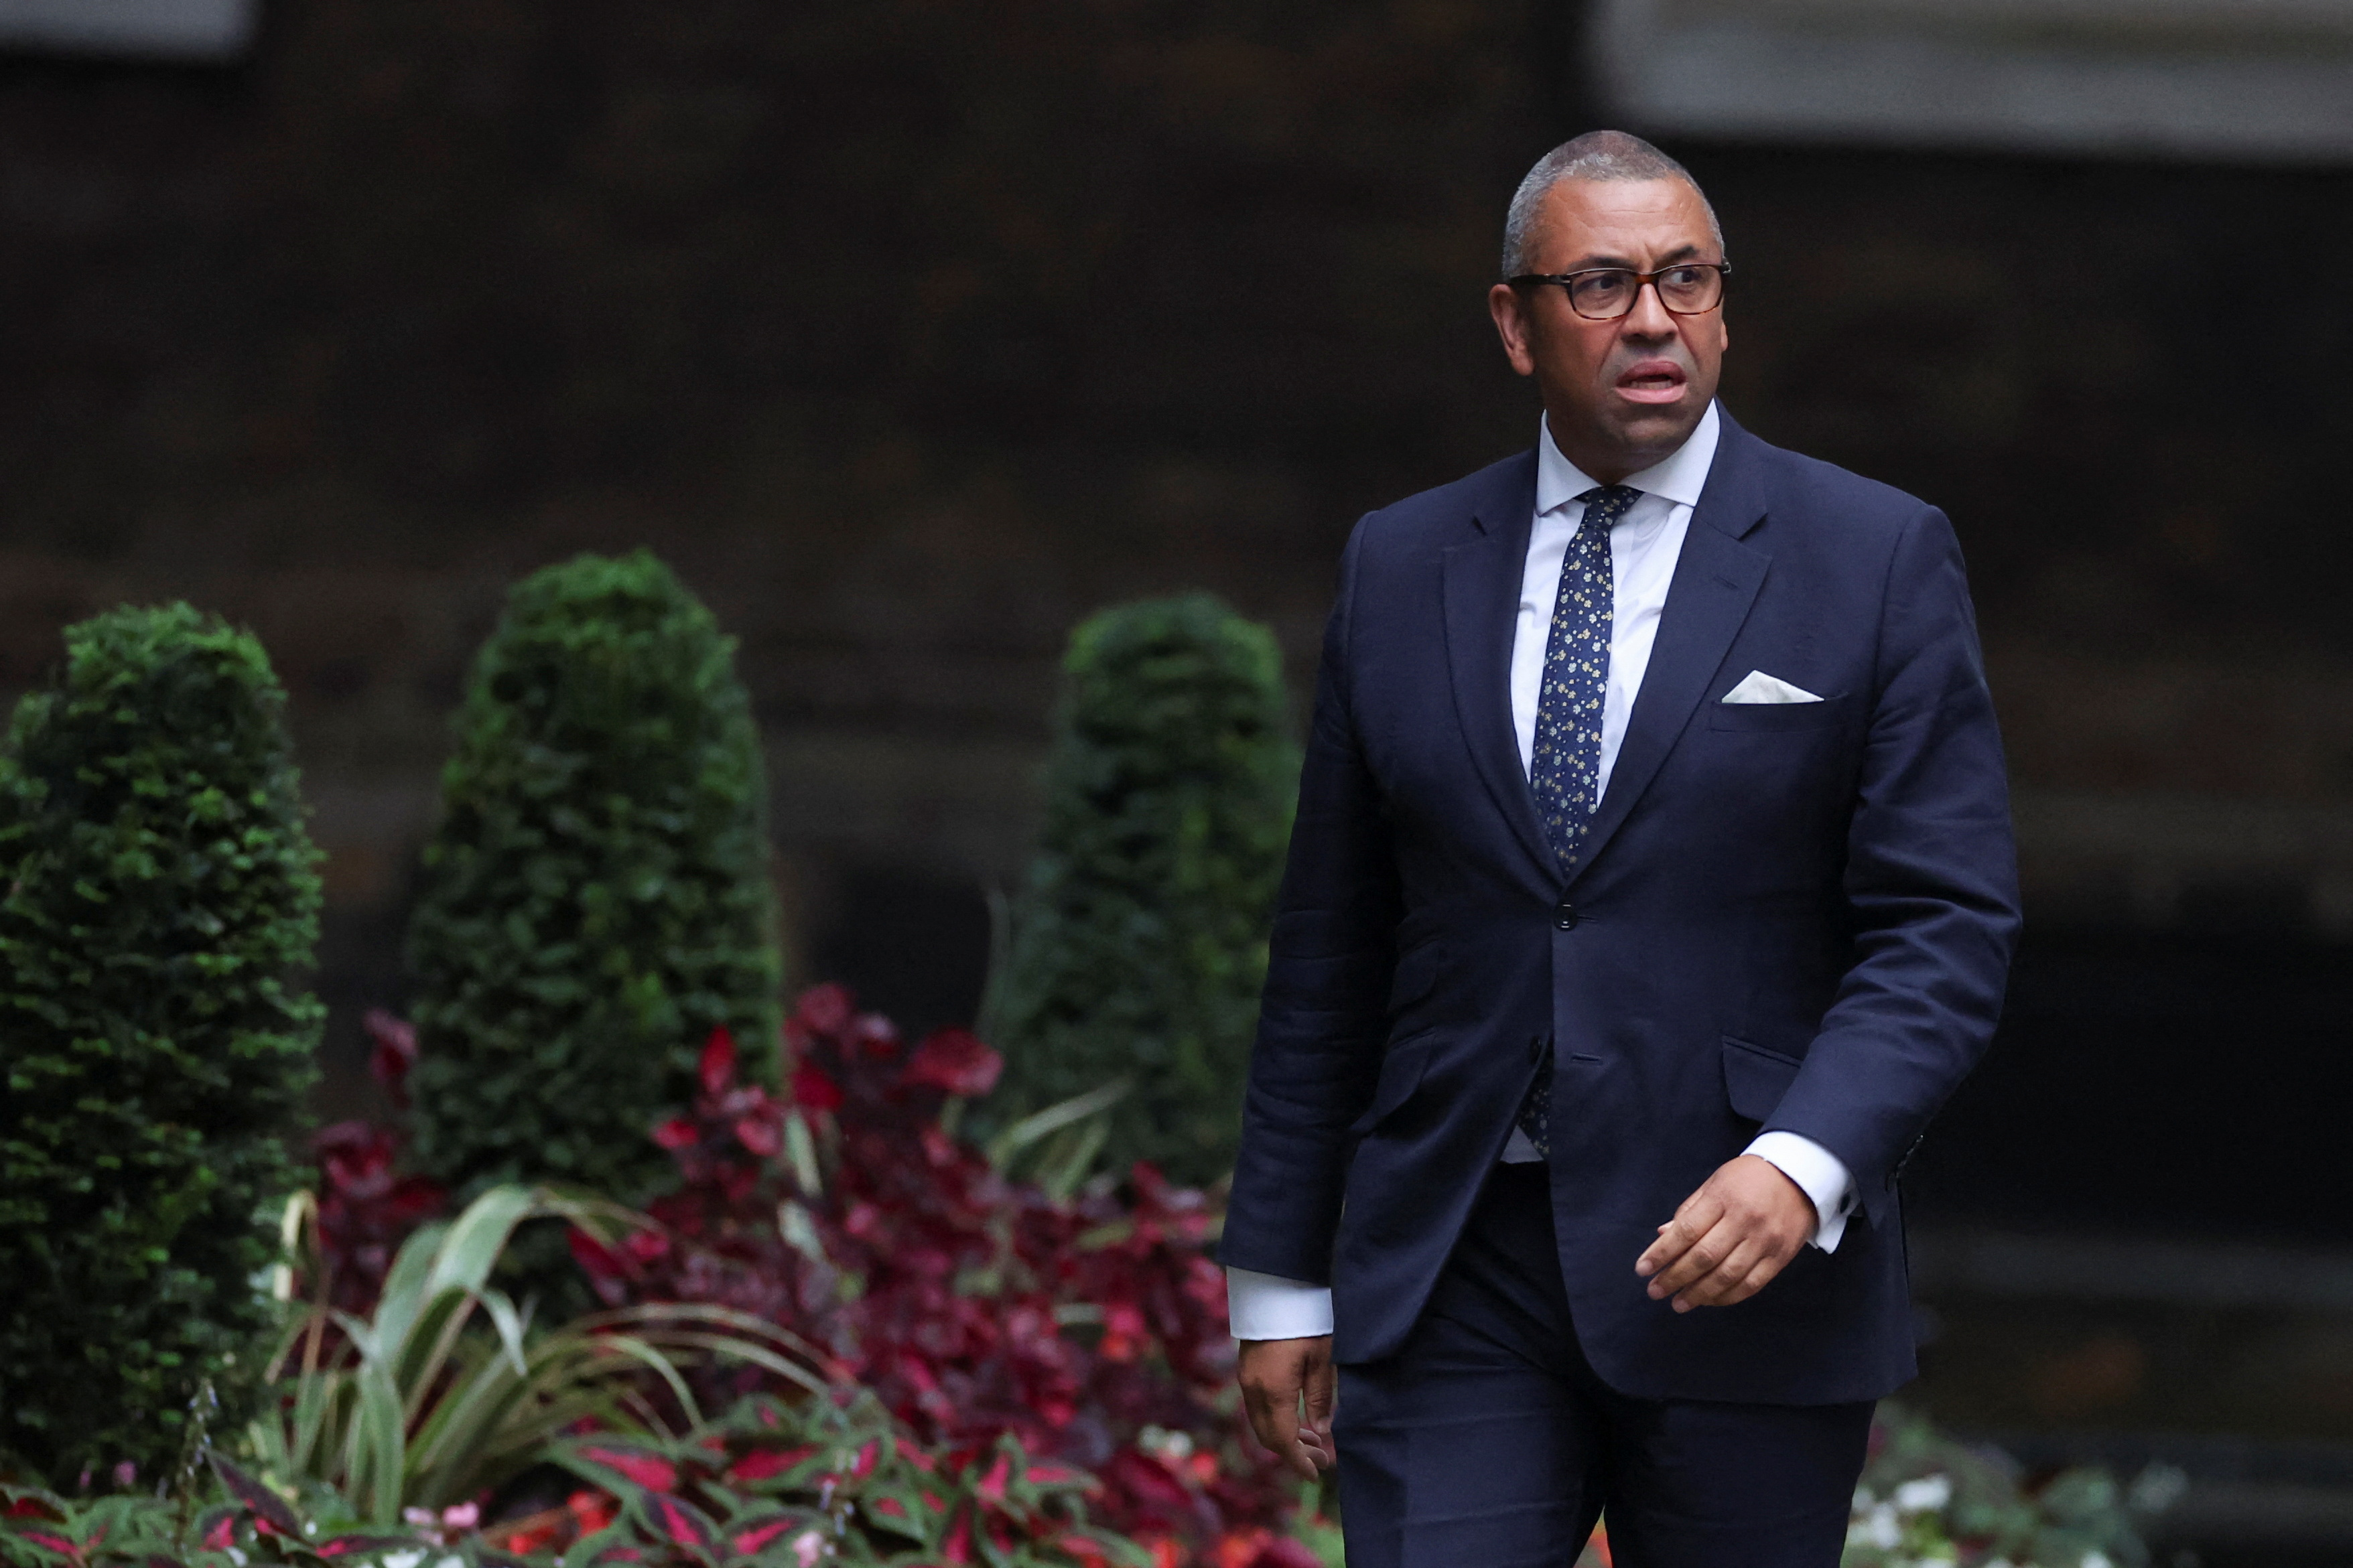 James Cleverly arrives at Number 10 Downing Street in London